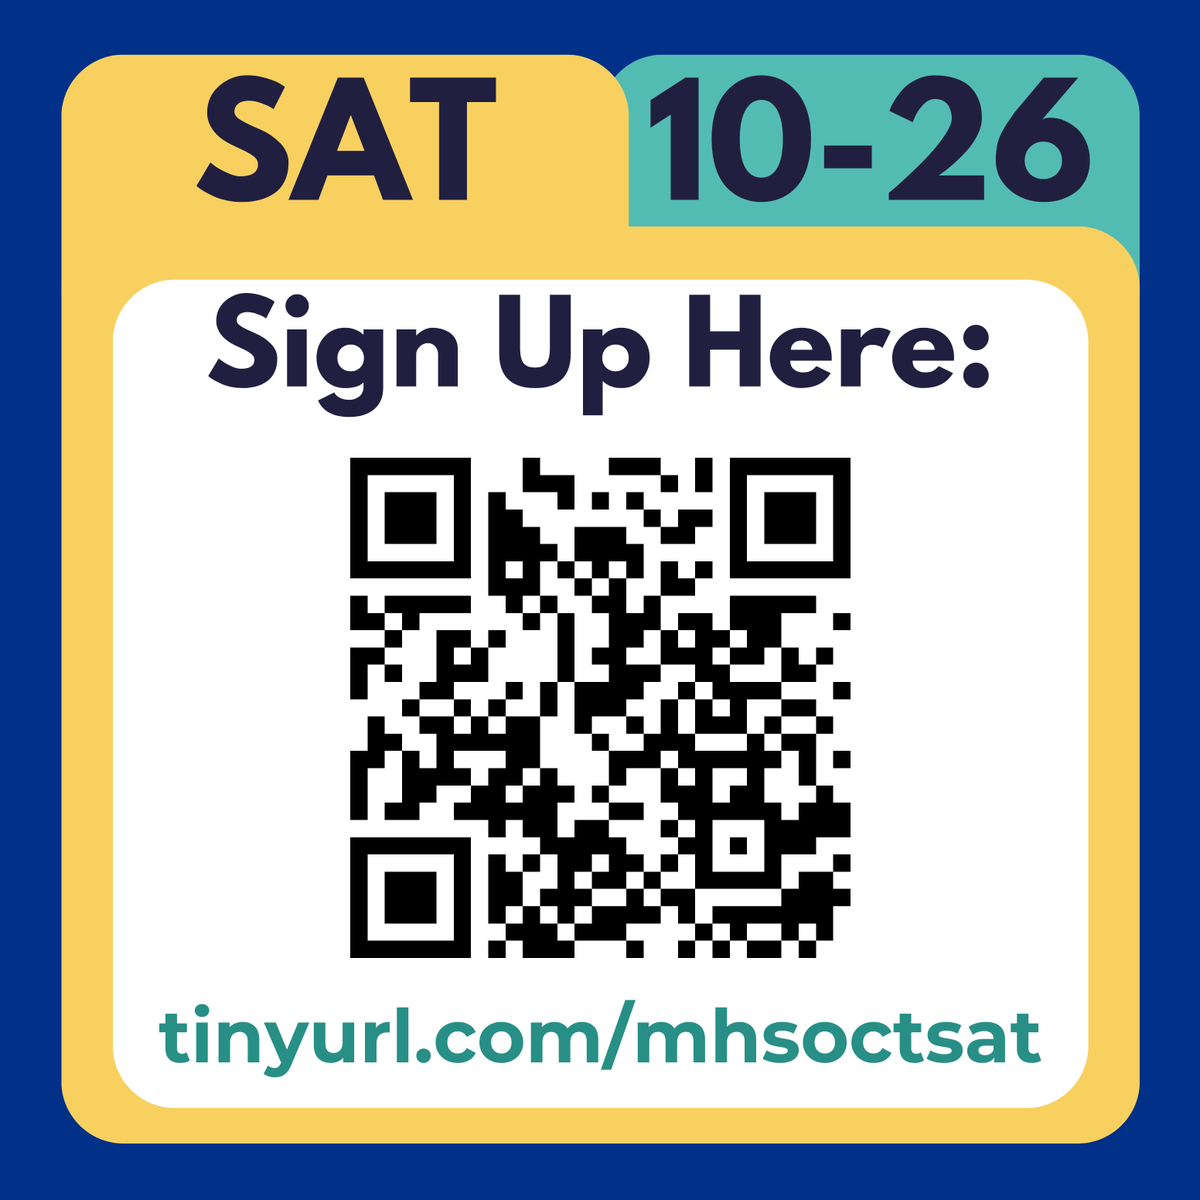 Seniors: This is your last opportunity to take the SAT at MHS! The test will take place during the school day on 10-26. Use the link or QR code to sign up & pay by cash/check in the main office by 9-15 ($60 or $8 w/ waiver). Register here: tinyurl.com/mhsoctsat